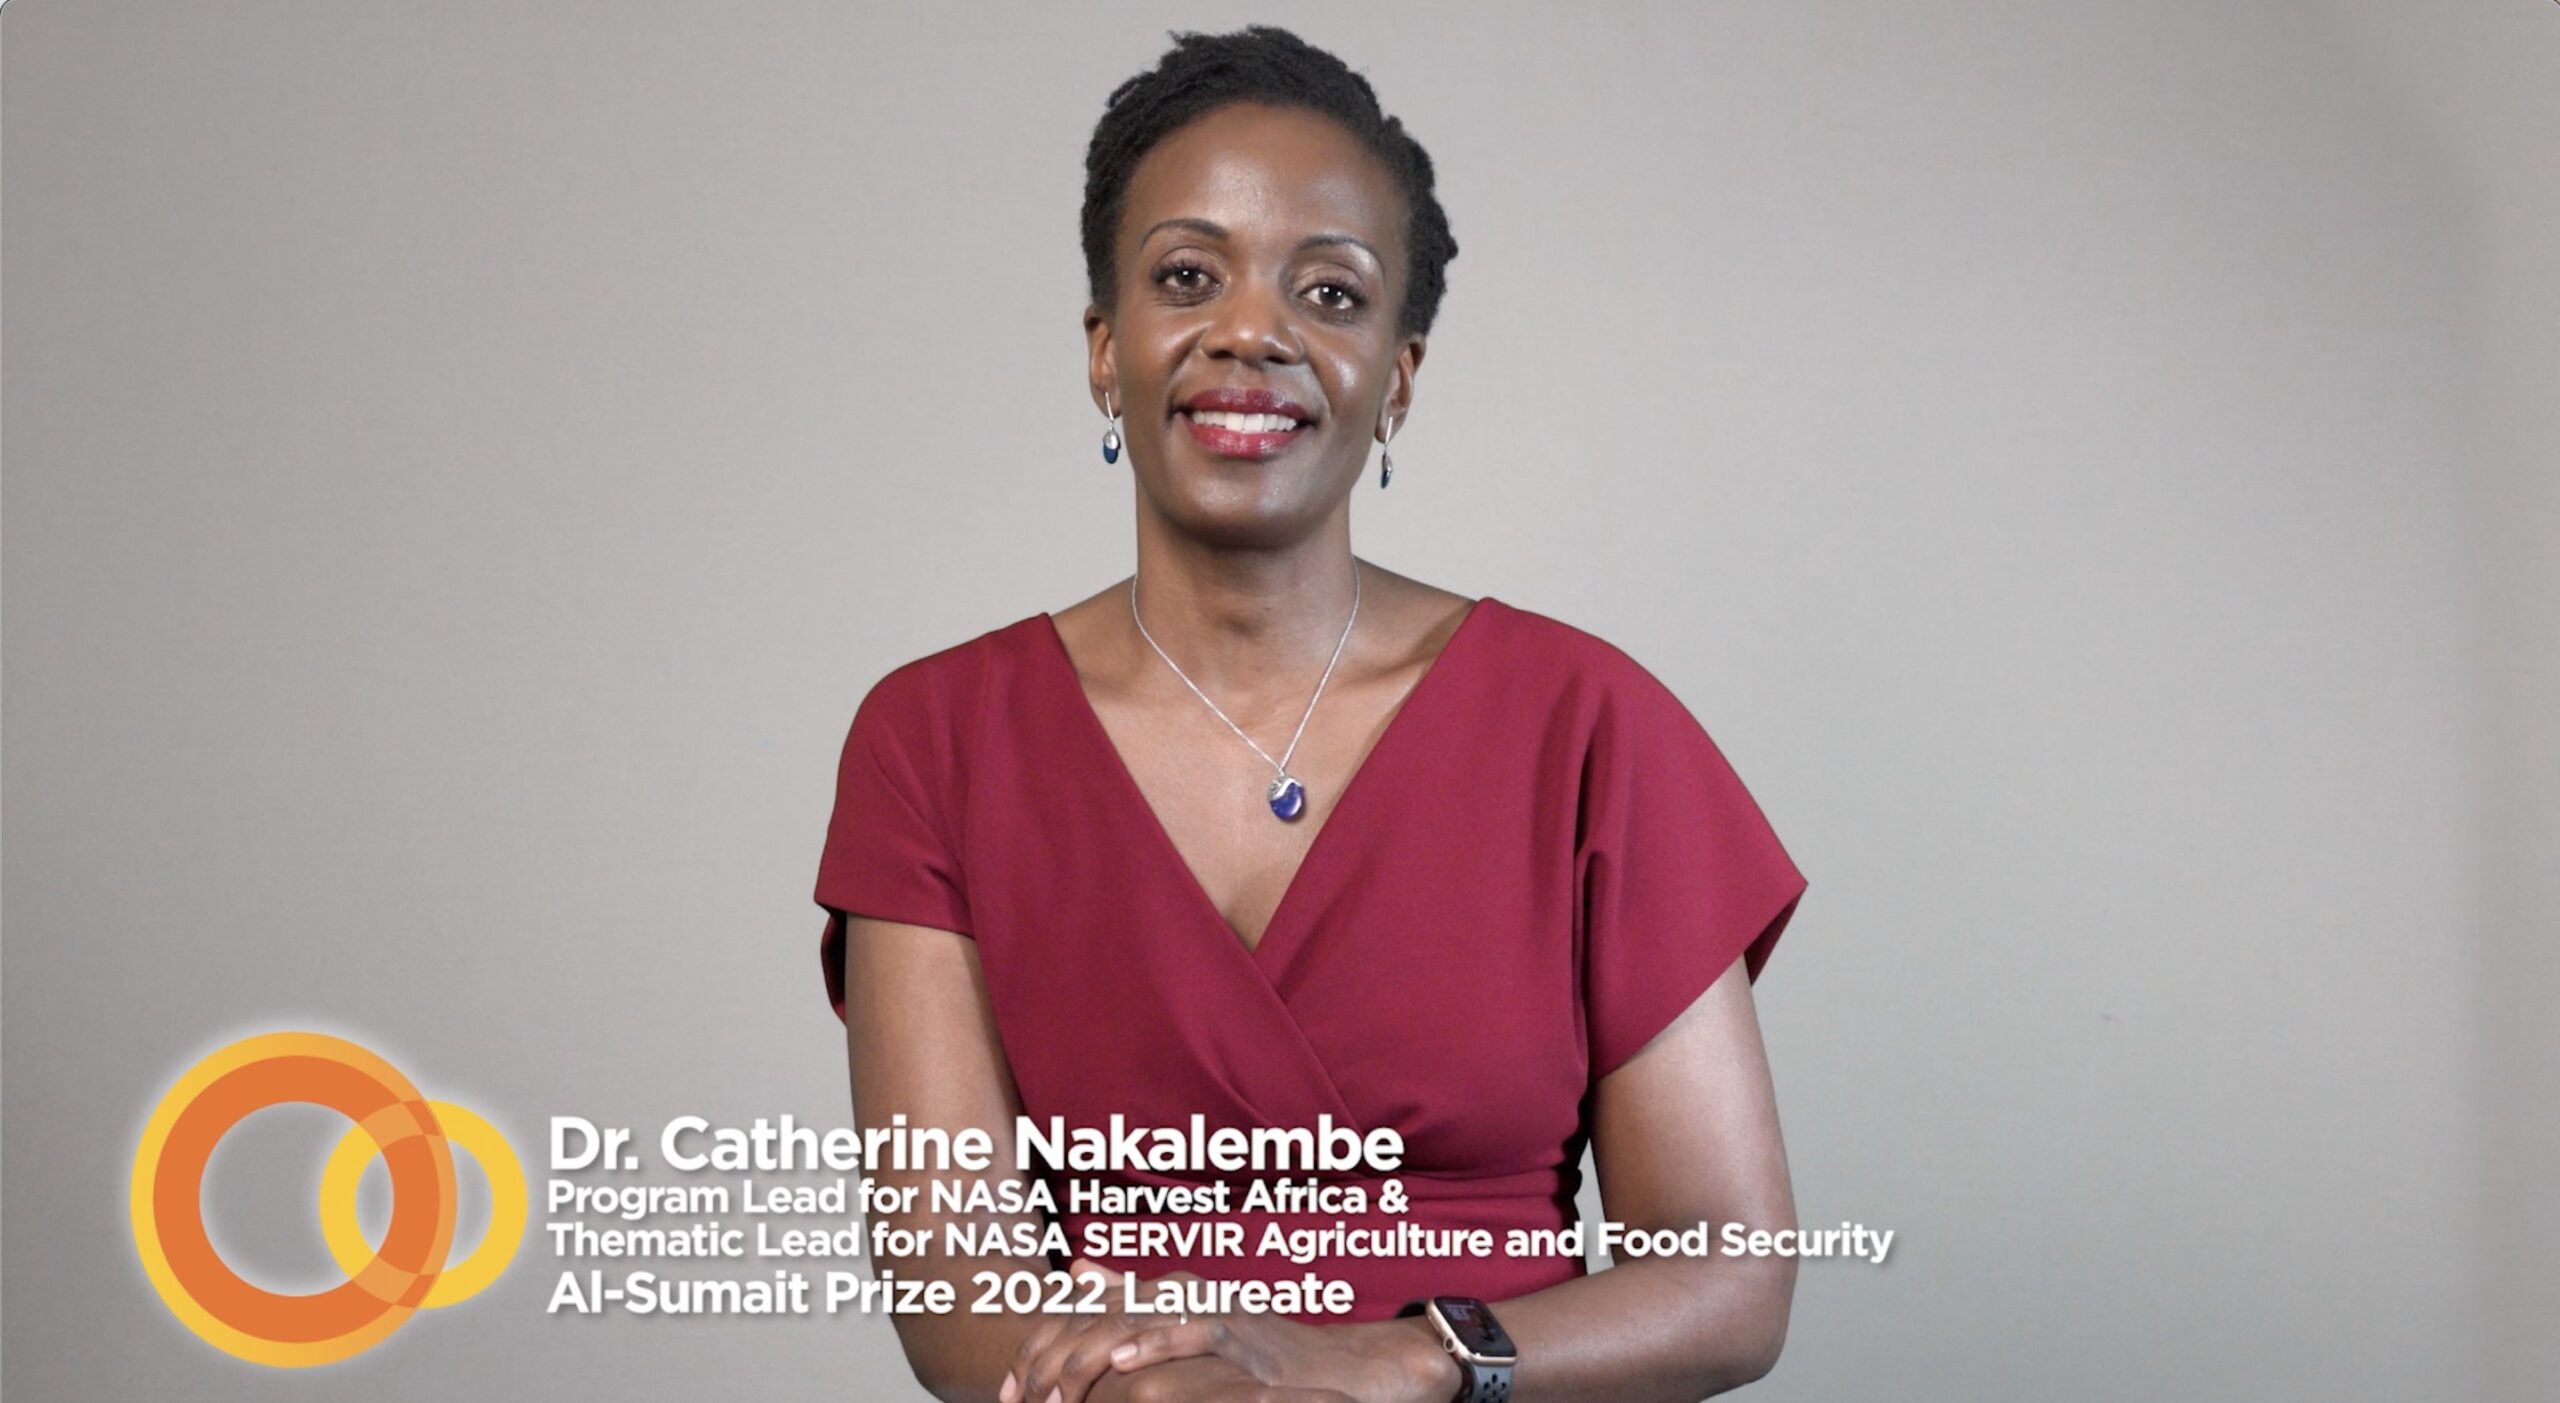 Dr. Catherine Nakalembe joint winner of the 2022 food security prize